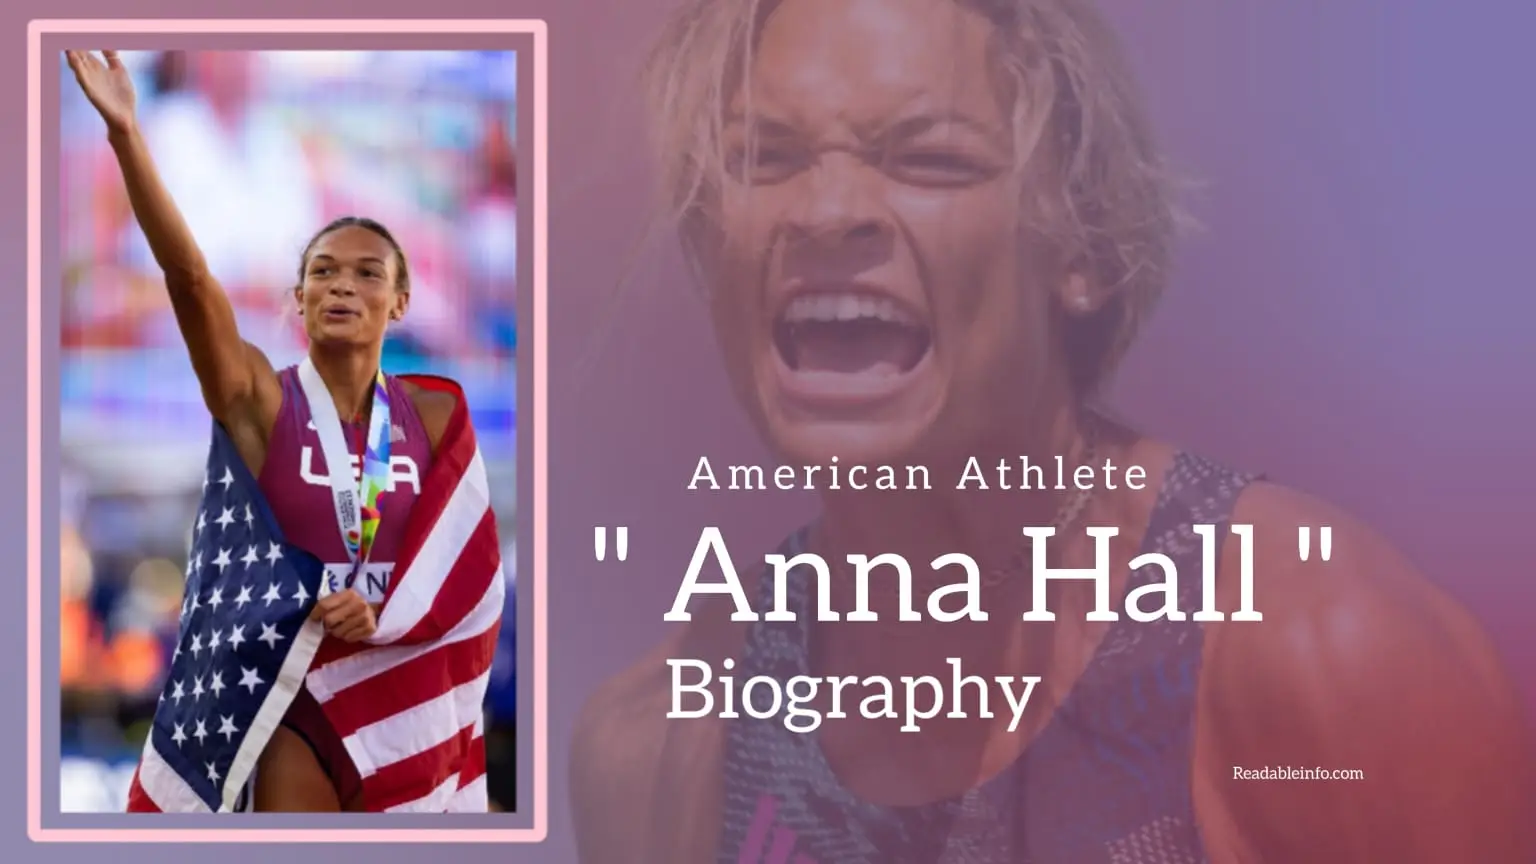 You are currently viewing Anna Hall Biography (American Athlete)